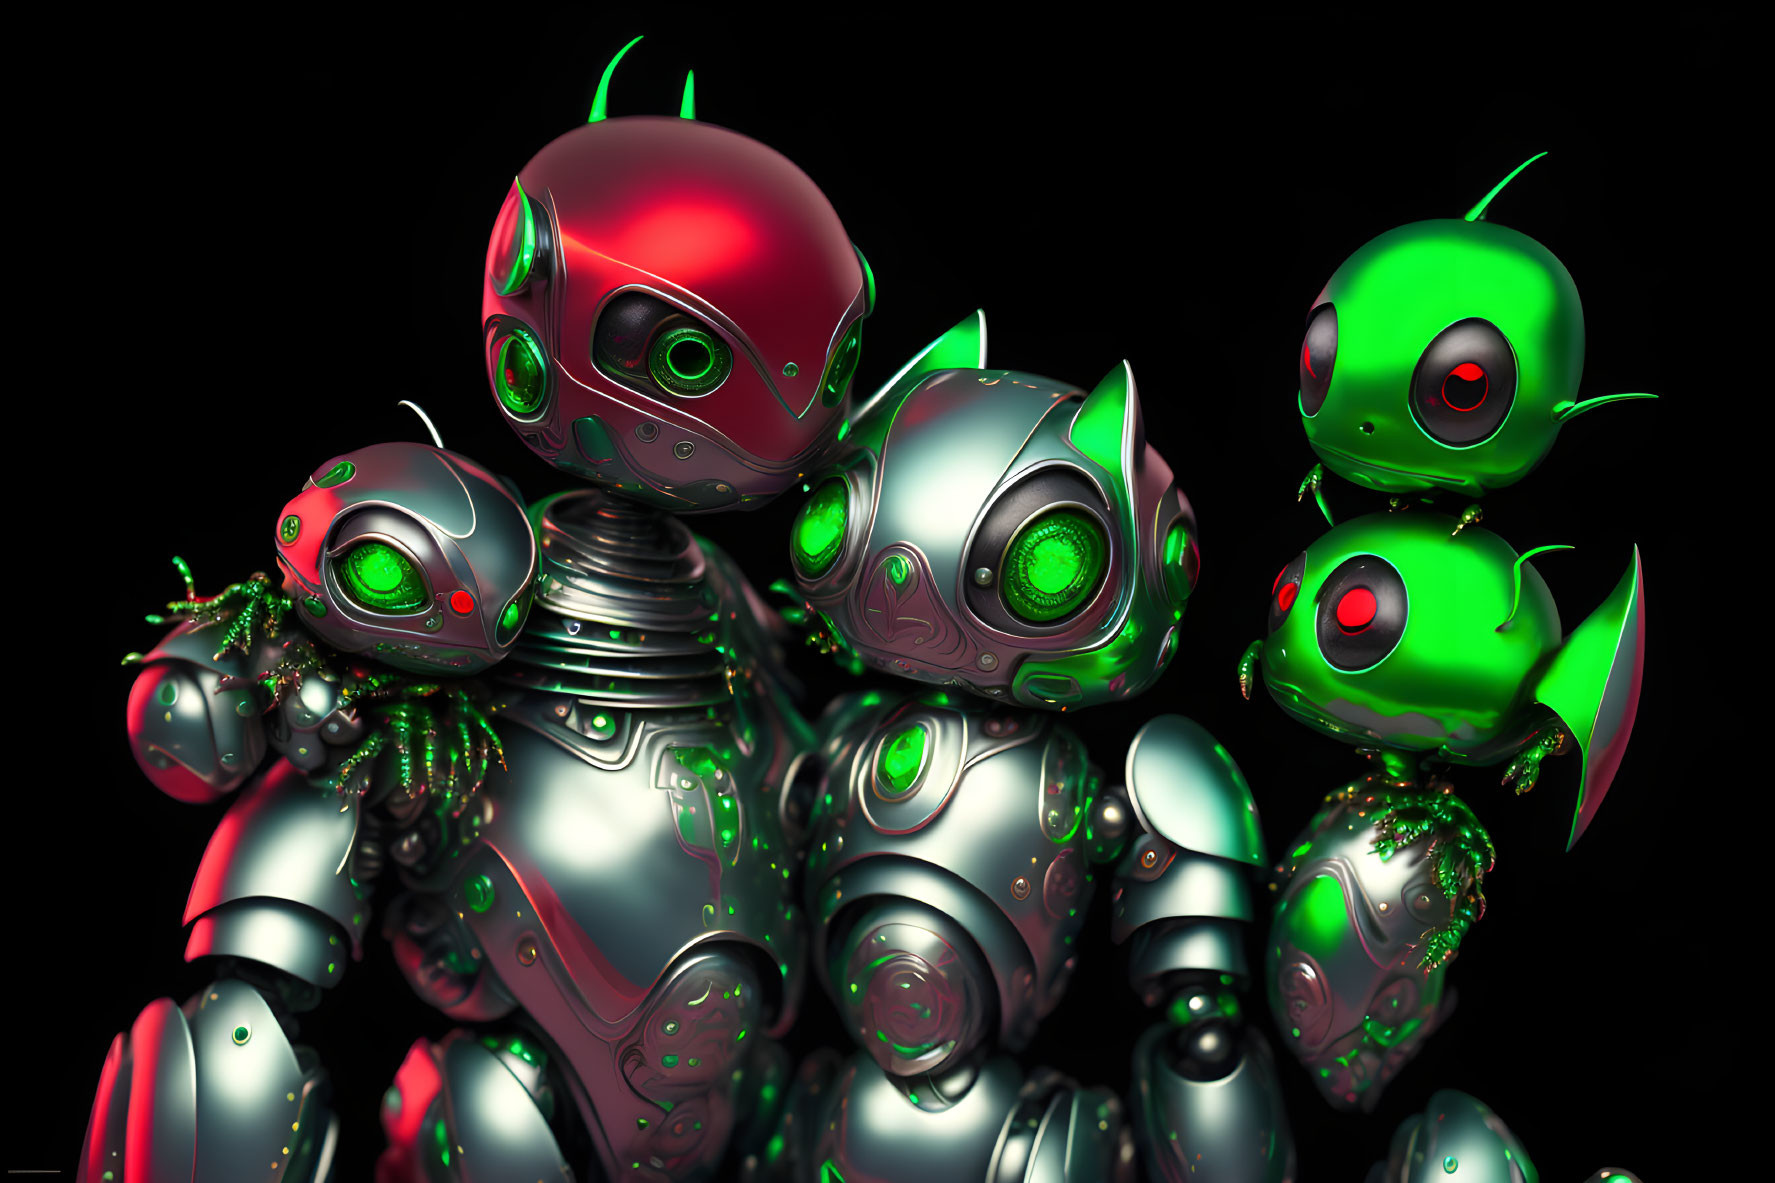 Shiny robots with red and green accents and glowing eyes on dark background